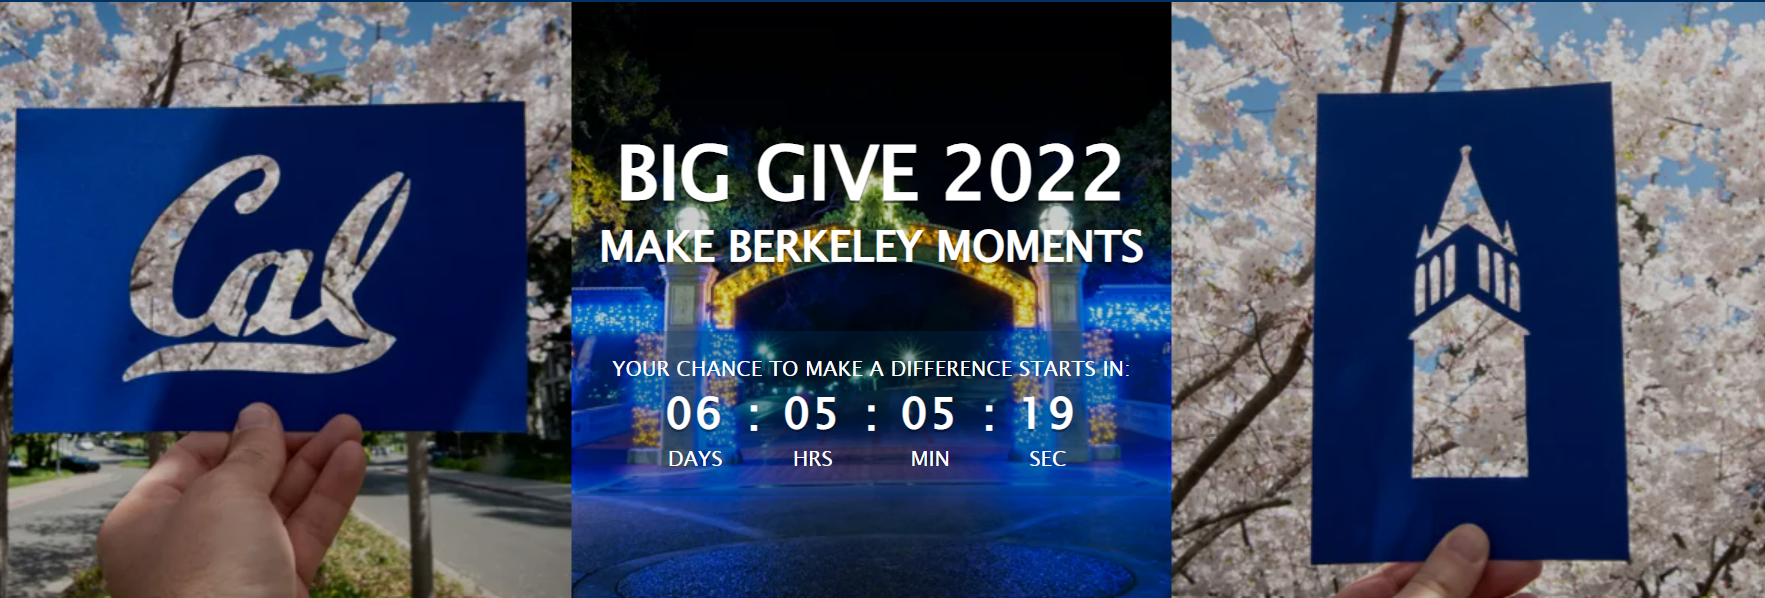 Big Give countdown graphic from website